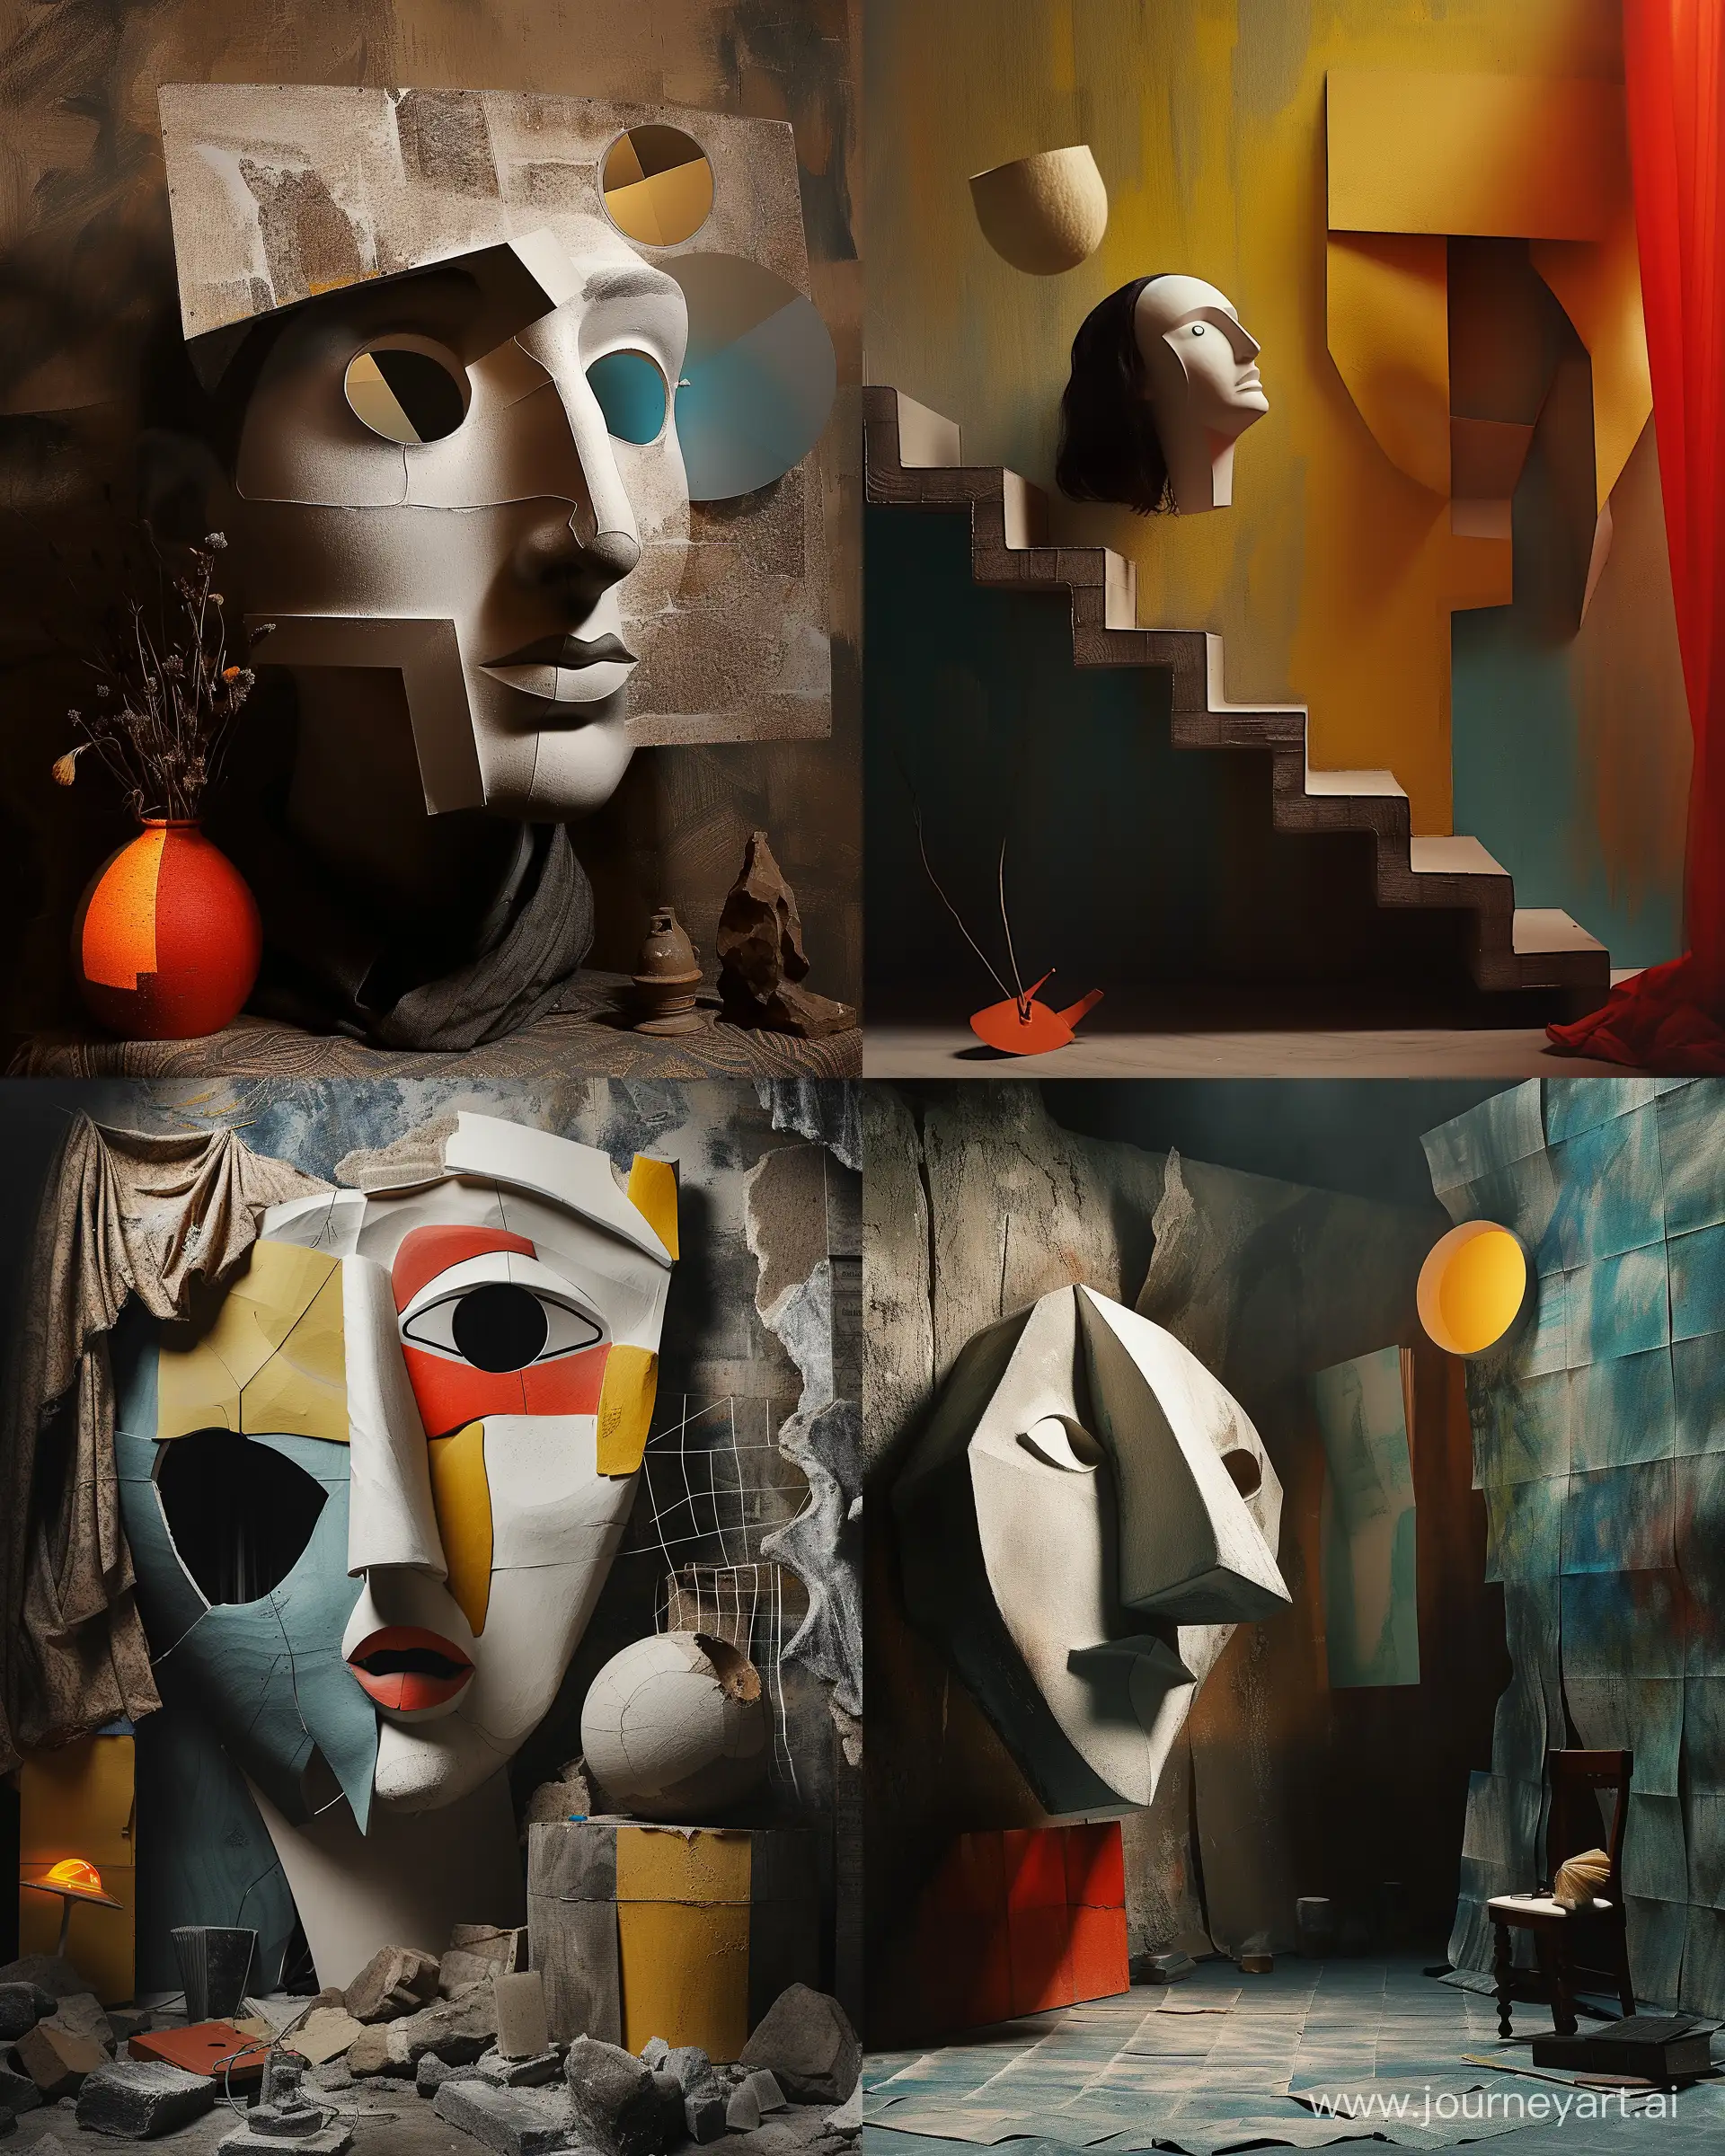 https://i.postimg.cc/PrxkBXnZ/2959340a-d210-4d65-88b0-ab3f21dd092b.png, staged photography of an atmosphere made by picasso, cubist art, surrealism --ar 4:5